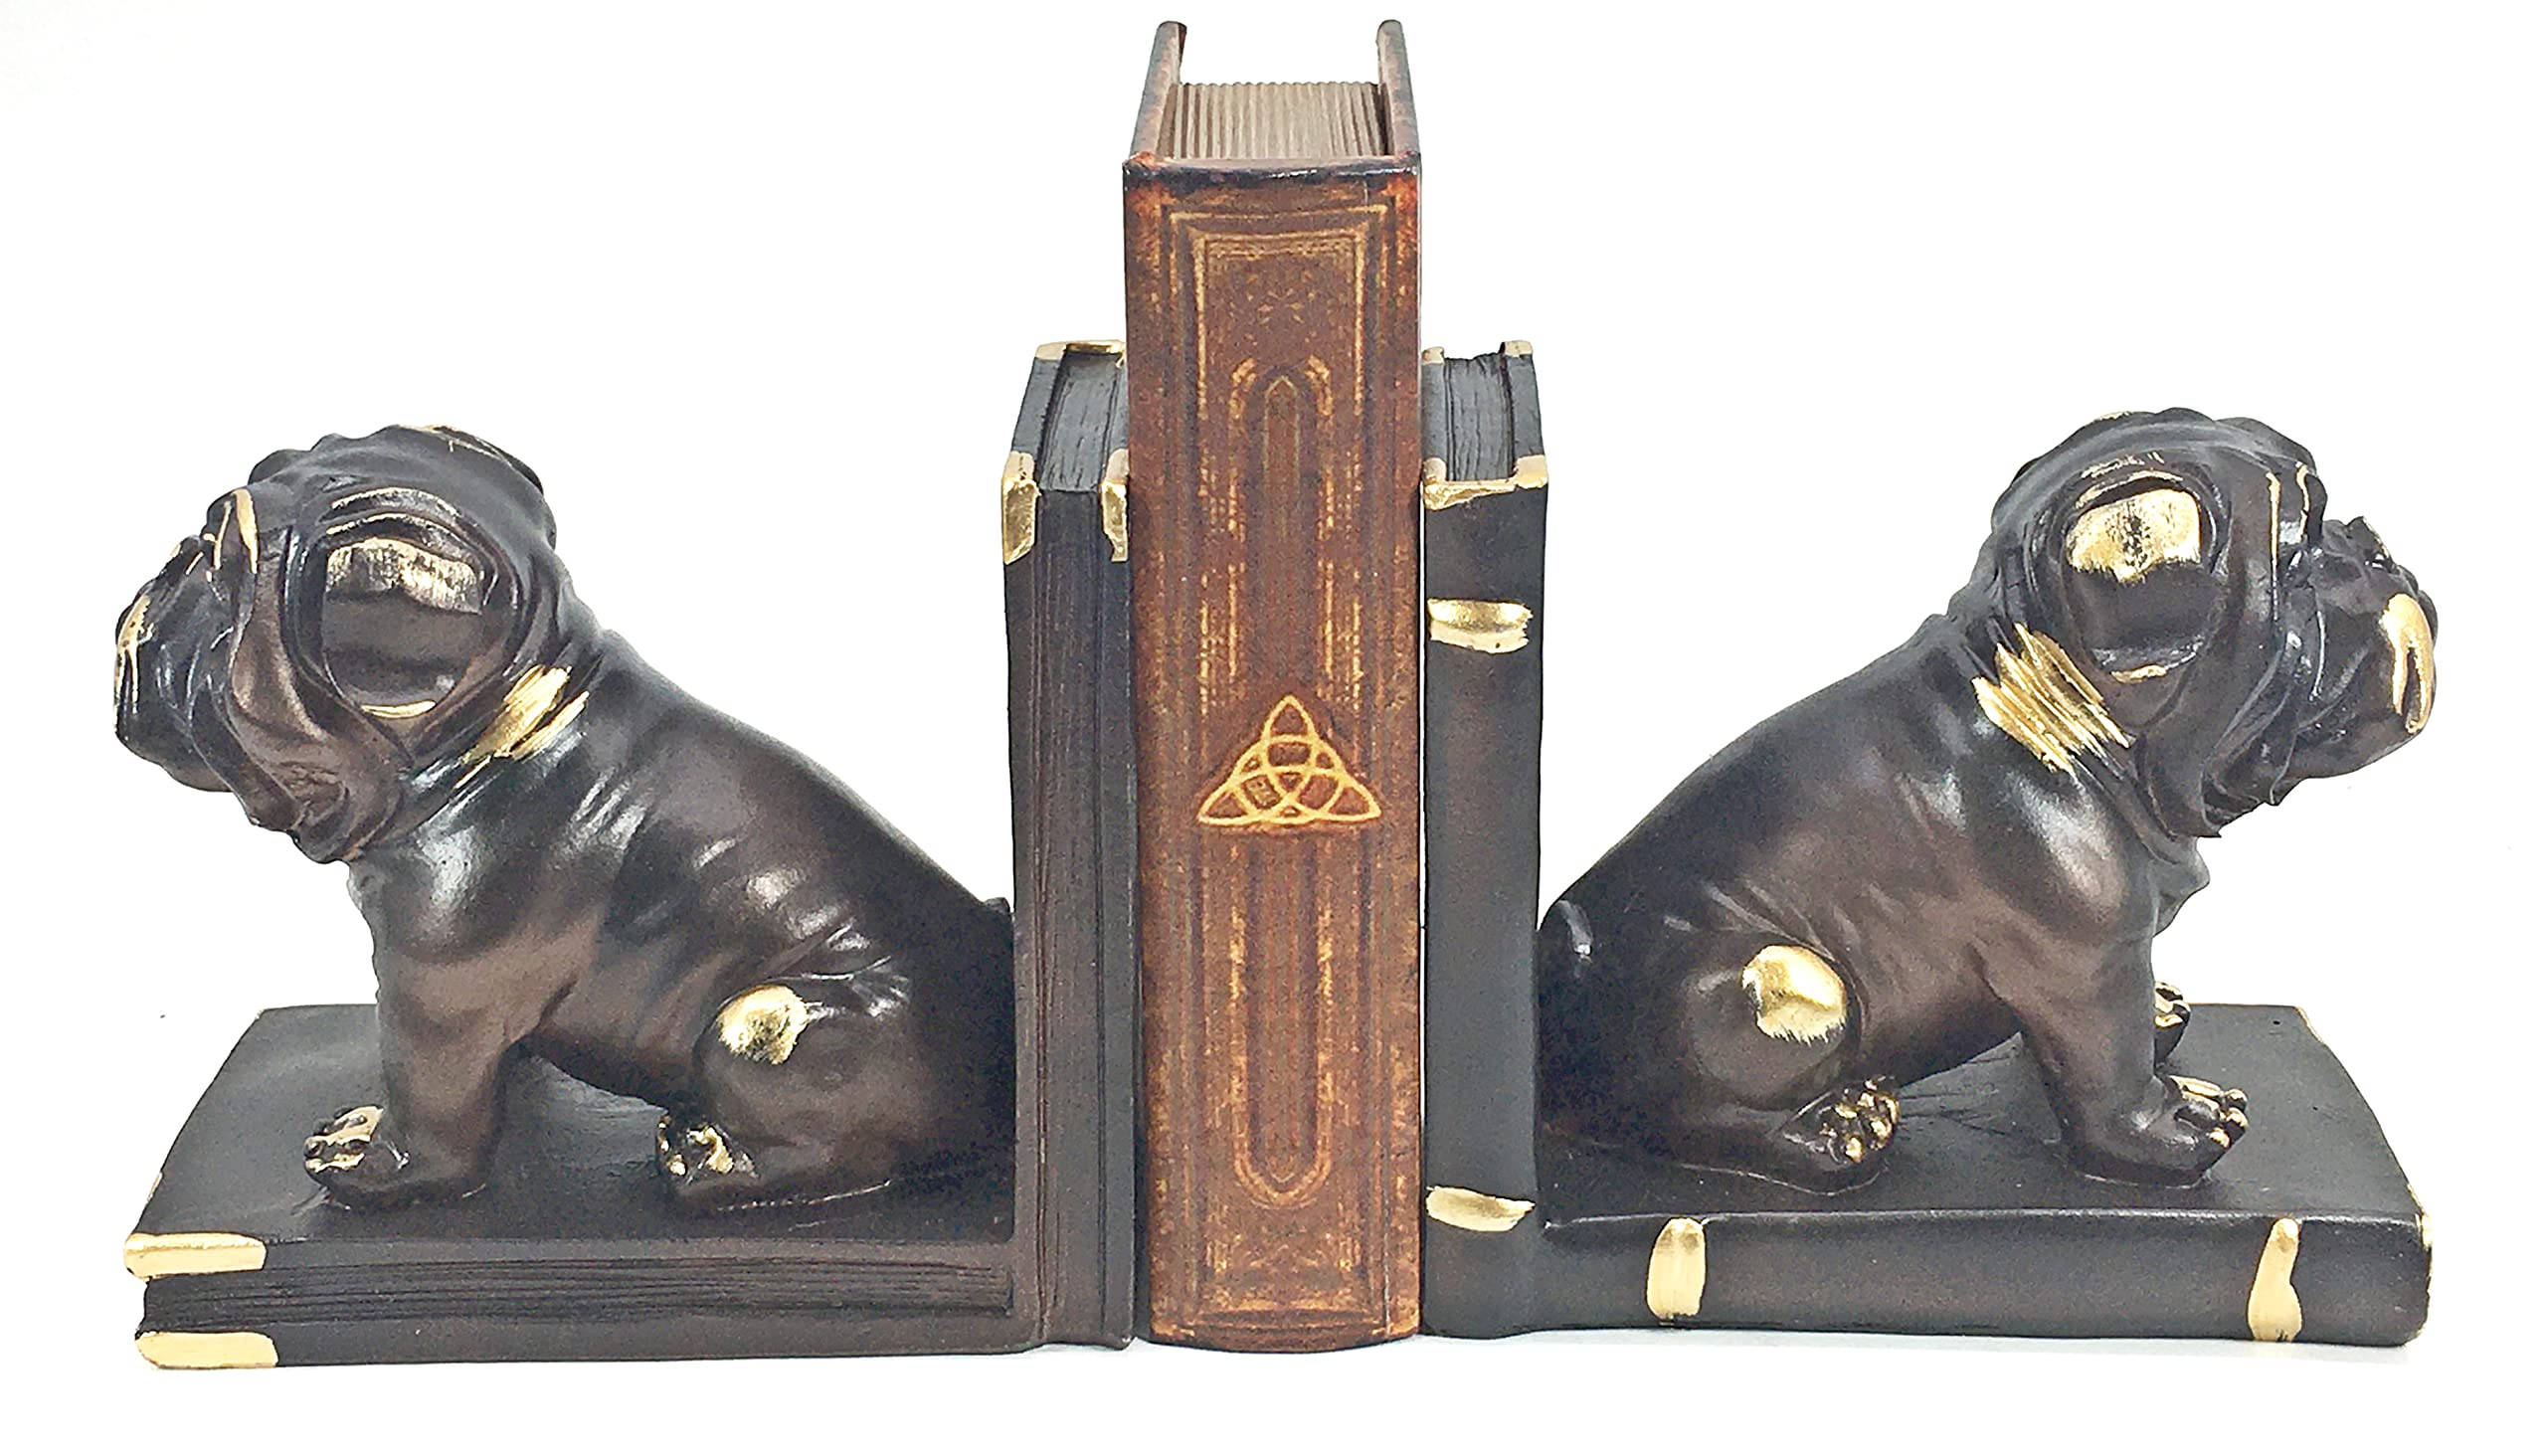 Bellaa Bulldog Bookend Pug Mascot Boston Dog Statues Pet Rustic Unique Book Ends Home Office Books Shelves Stoppers Holder Nonskid Rustic Vintage D...